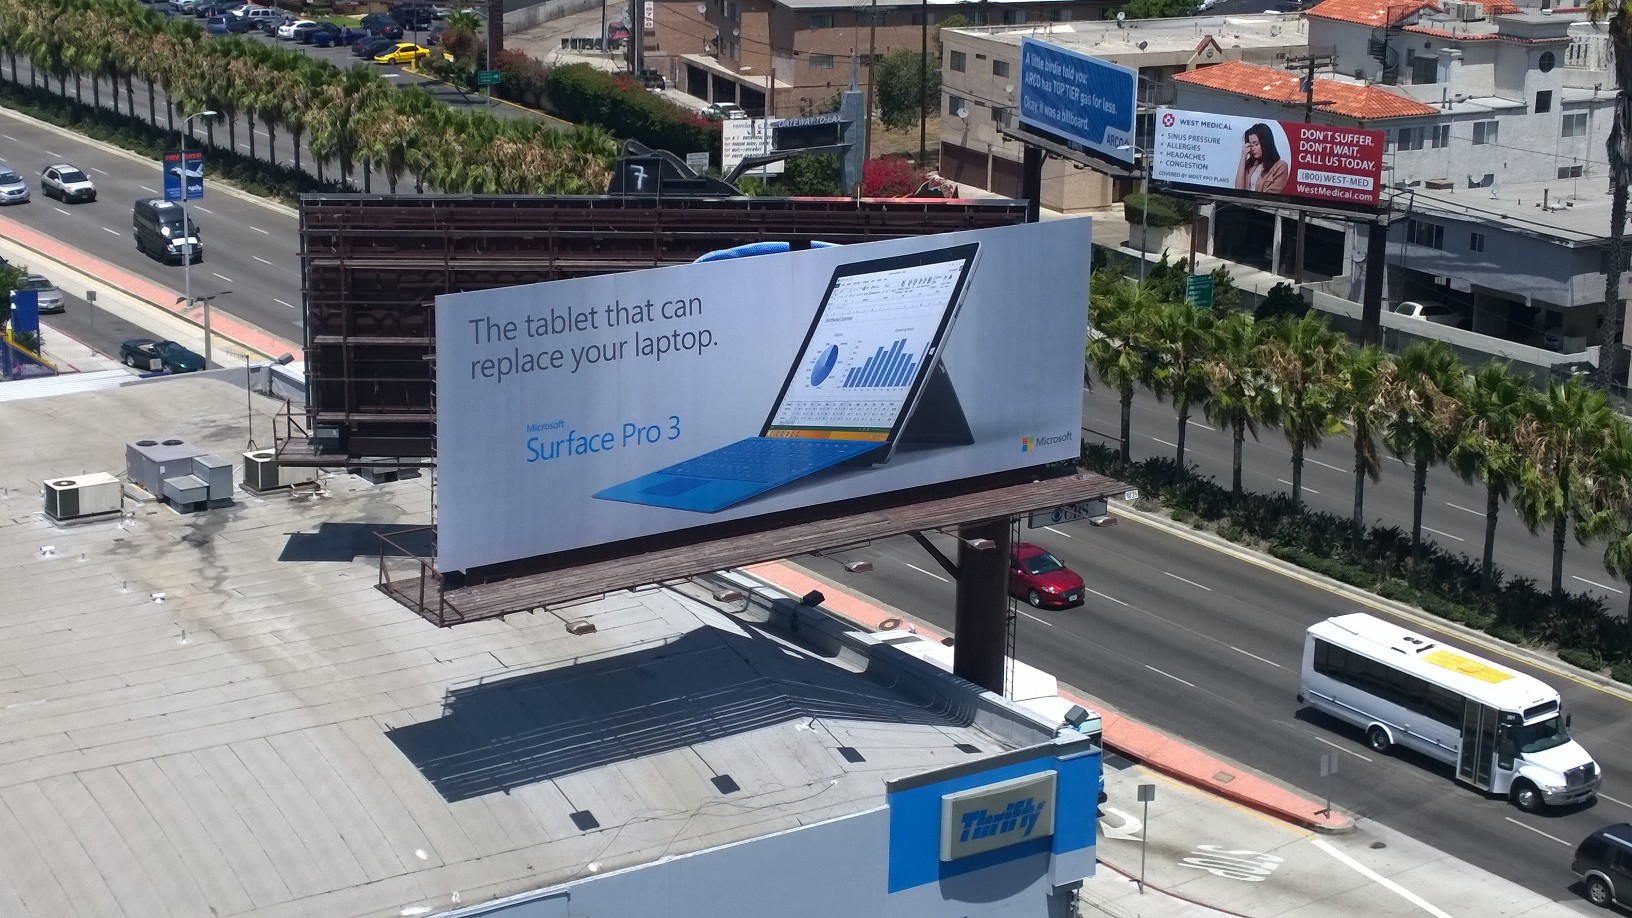 Surface Pro 3 Billboard from the balcony of room 1084 in the Westin Los Angeles airport at 5400 W Century Blvd, Los Angeles, CA 90045